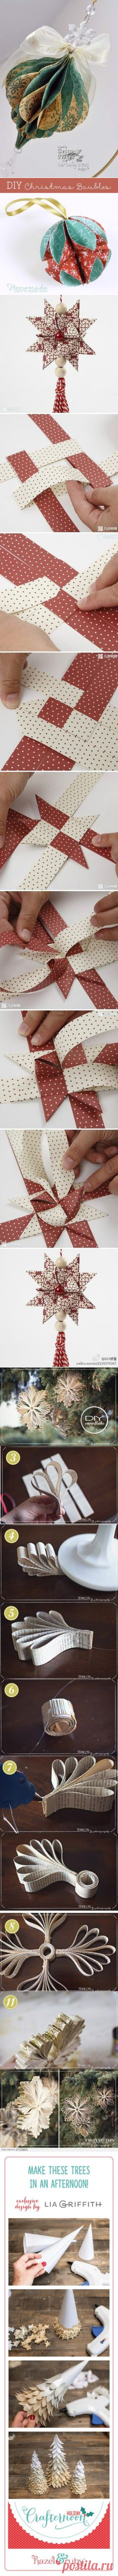 (192) DIY Paper Christmas Ornaments with Step by Step Photo Tutorial and Instructions | Nadal